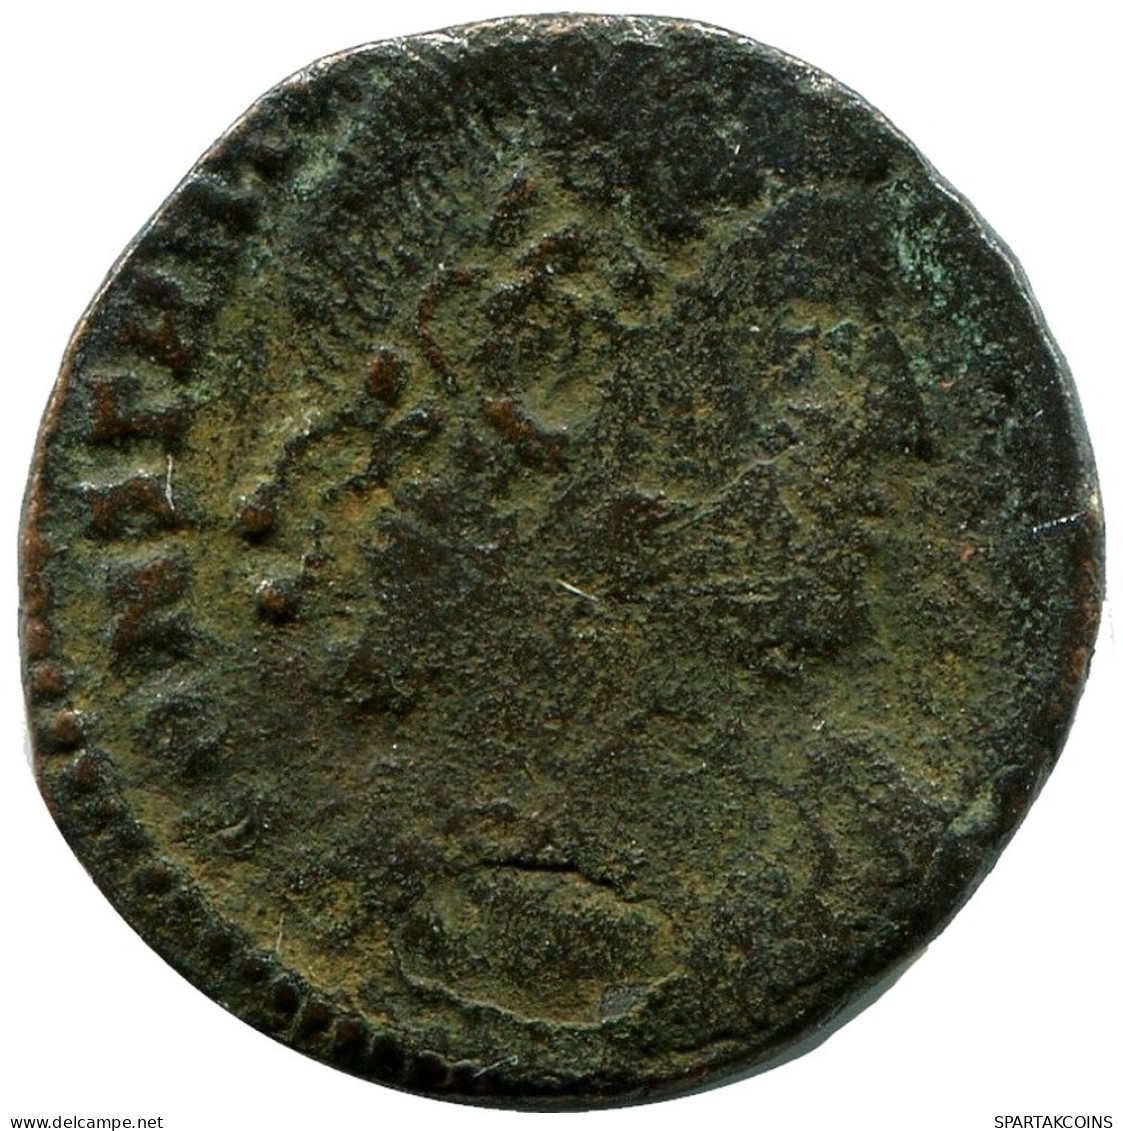 CONSTANTINE I MINTED IN HERACLEA FOUND IN IHNASYAH HOARD EGYPT #ANC11208.14.D.A - The Christian Empire (307 AD To 363 AD)